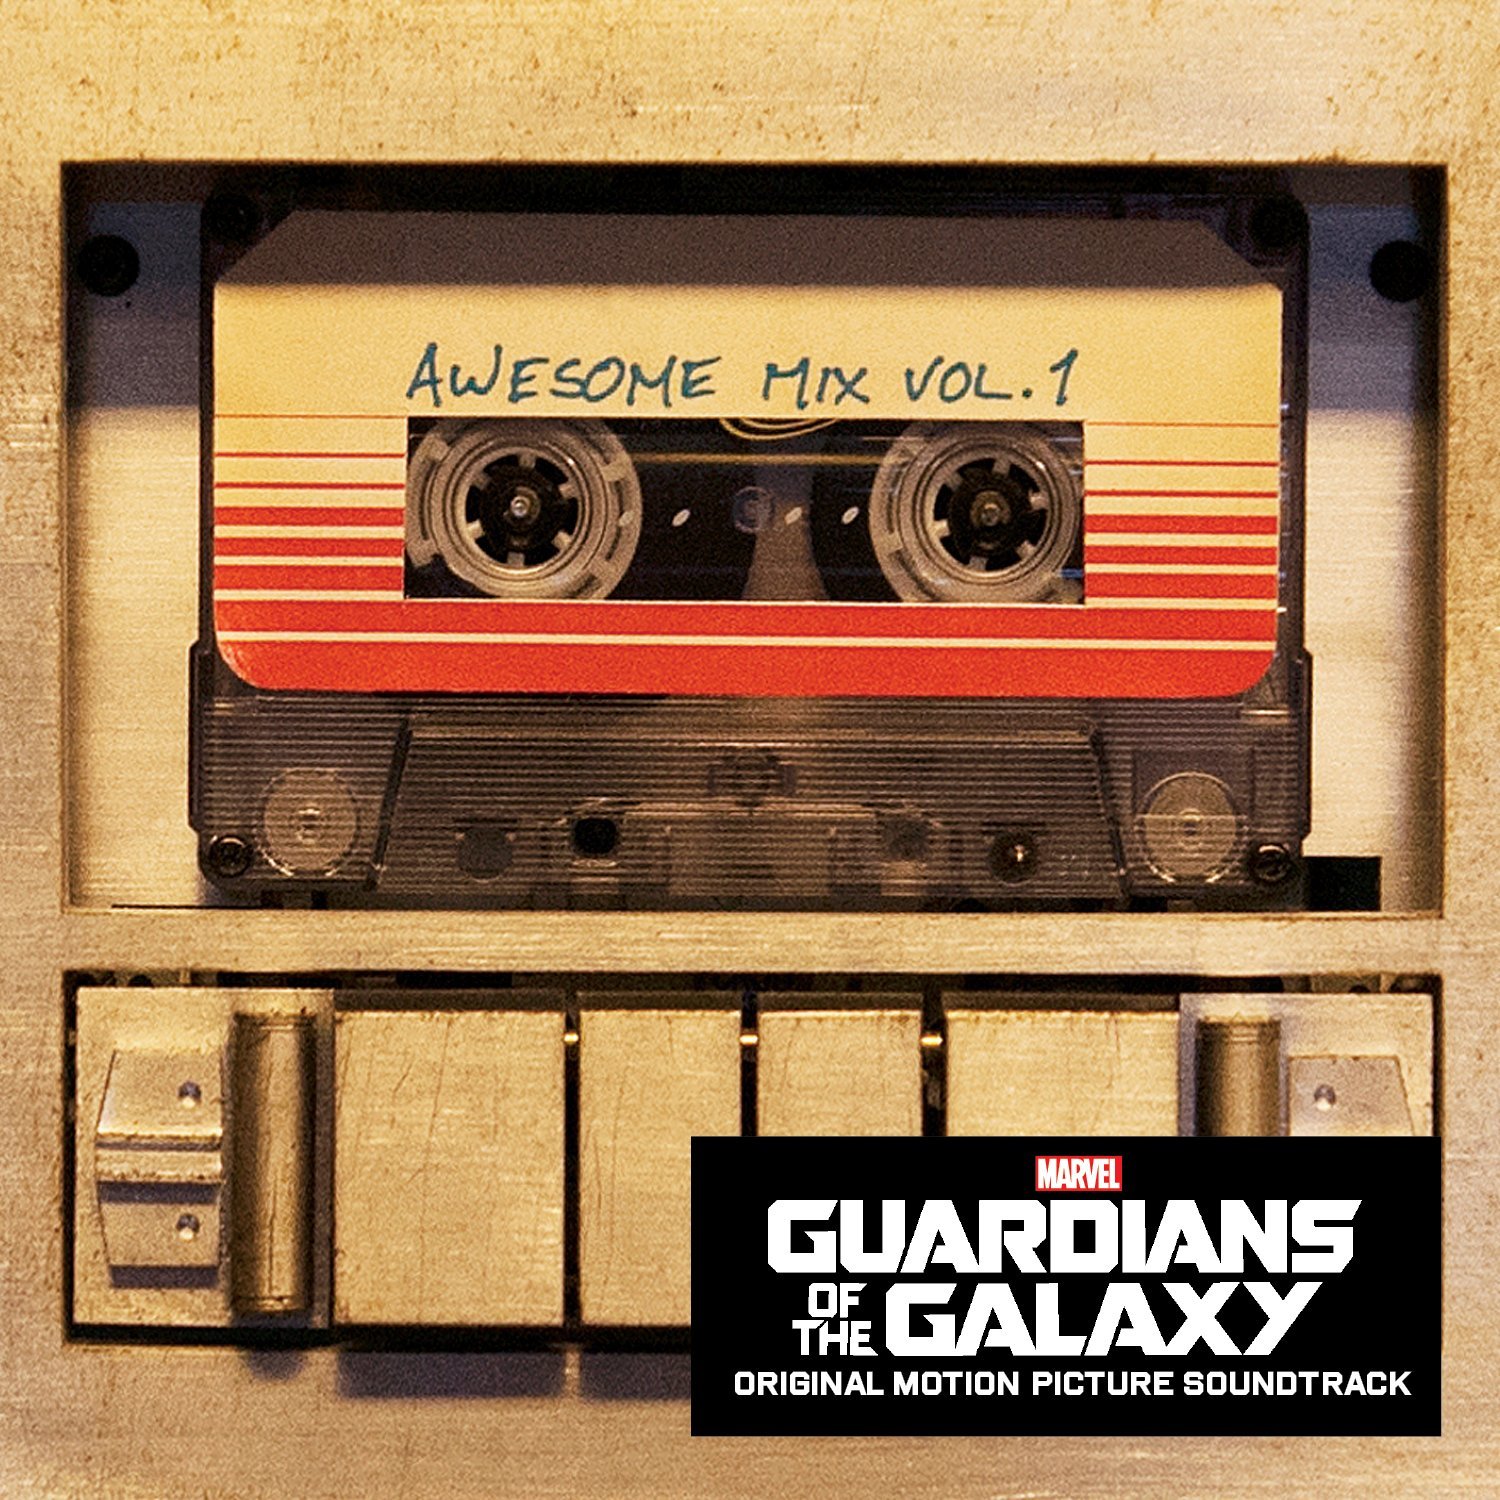 Star Lord’s Awesome Mix Tape Cassette from Guardians of the Galaxy